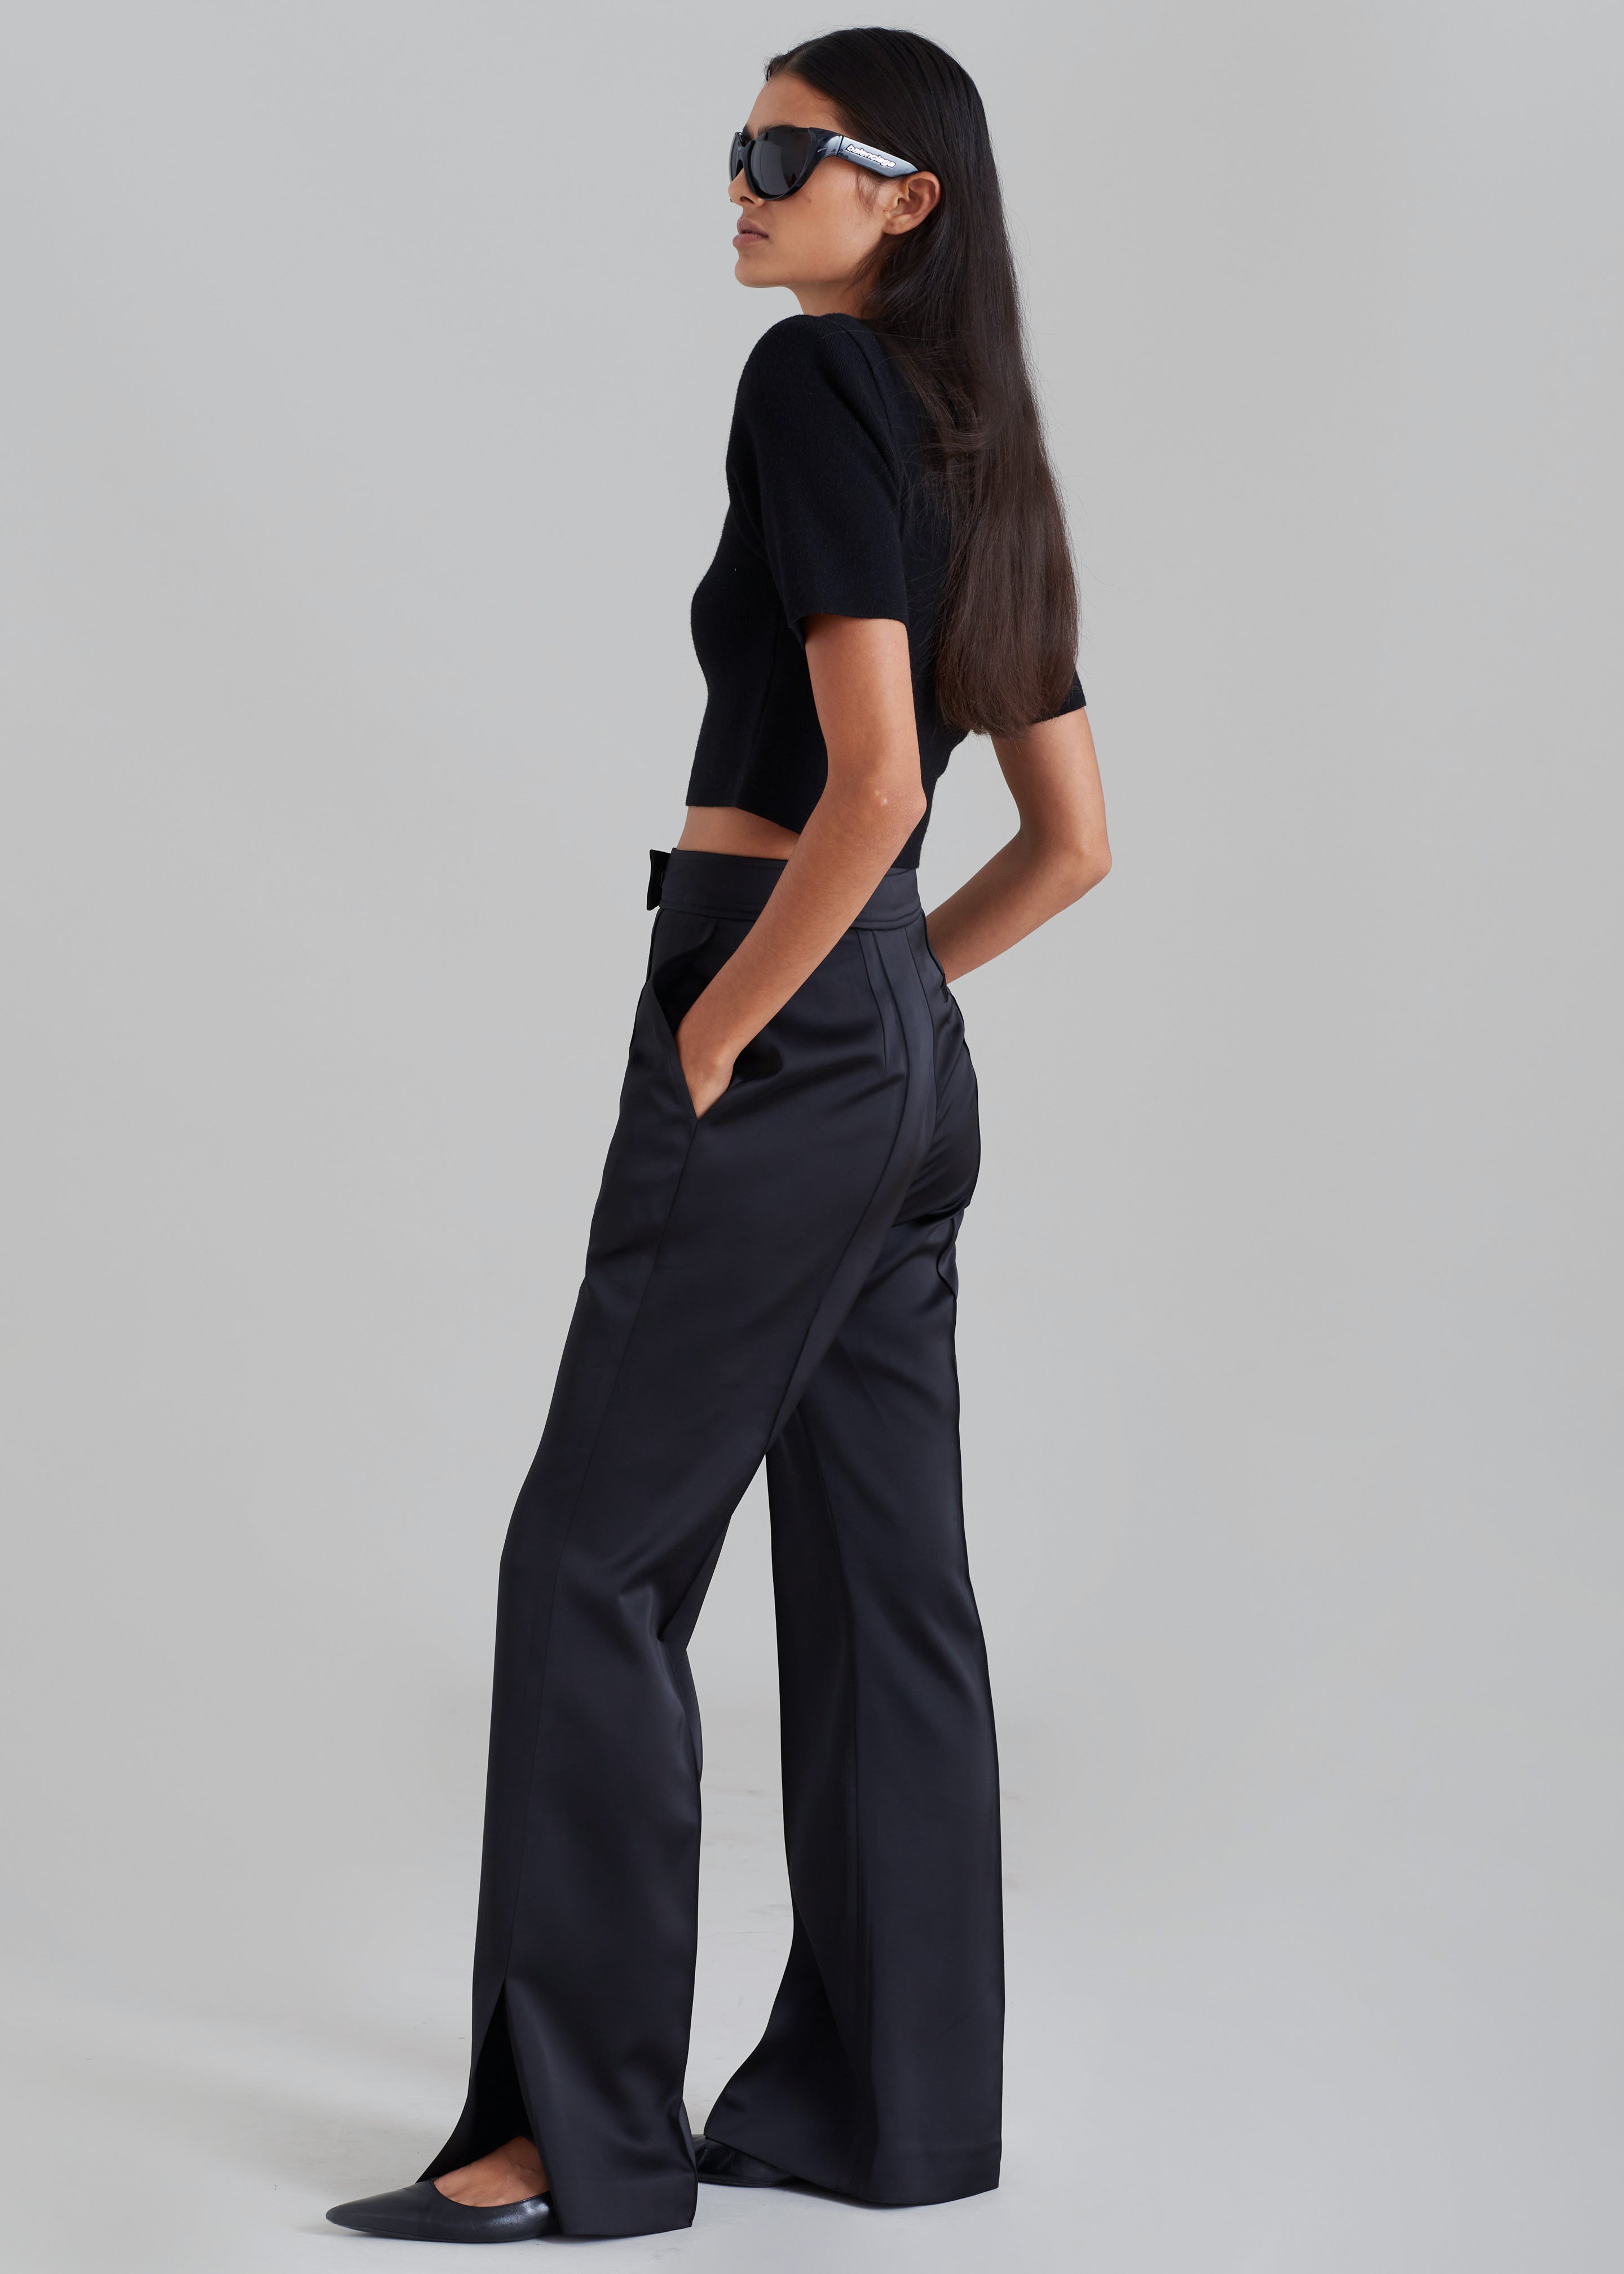 Soft touch petite folded flare trousers - Black - Women - Gina Tricot